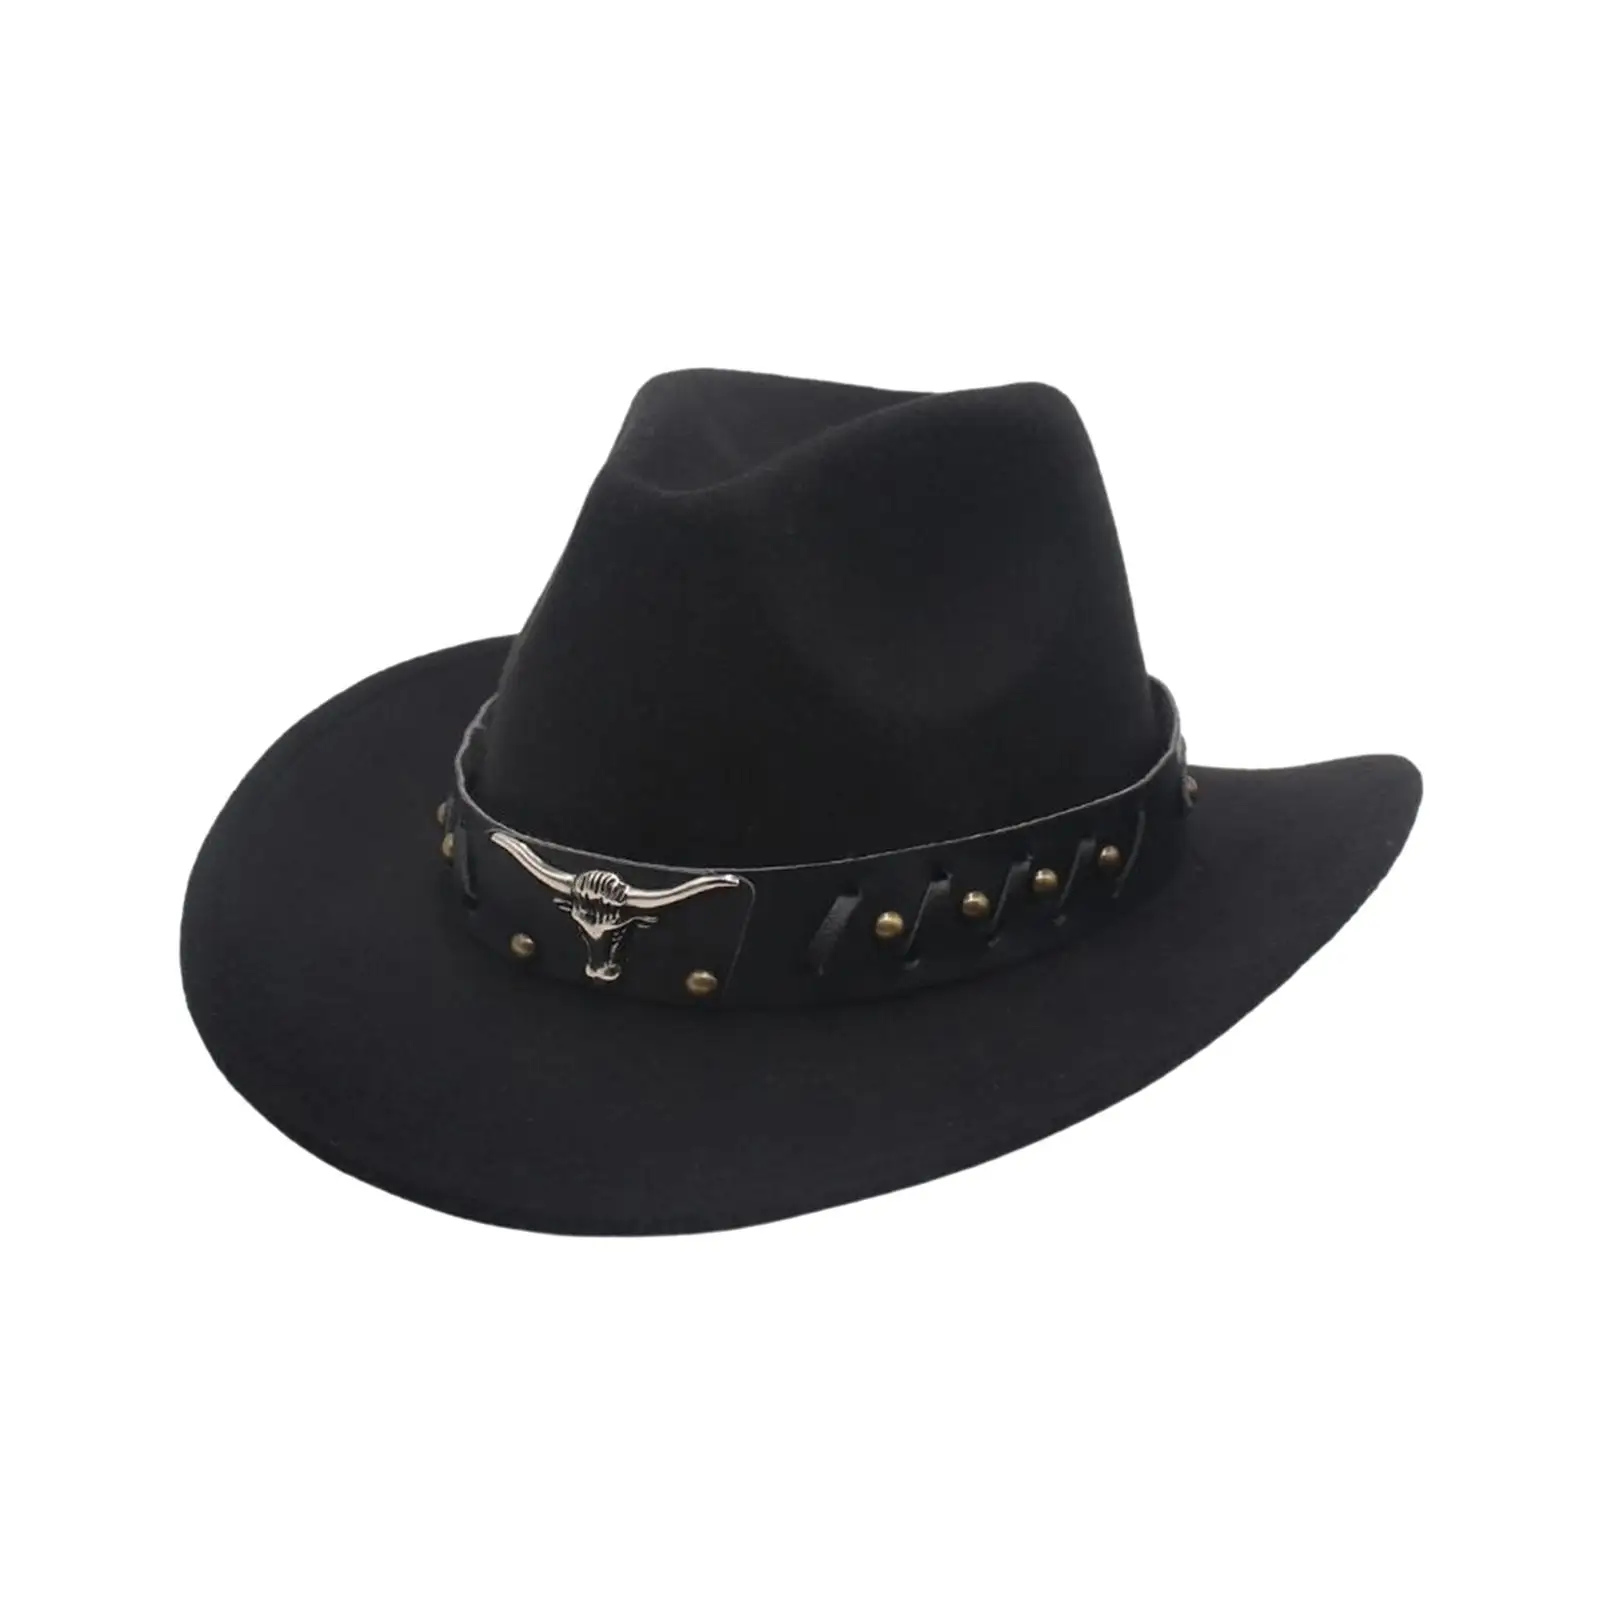 Cowboy Hat Props Adults Versatile Summer Classic Comfortable Big Brim Sunhat for Holiday Costume Autumn Carnival Outdoor Travel